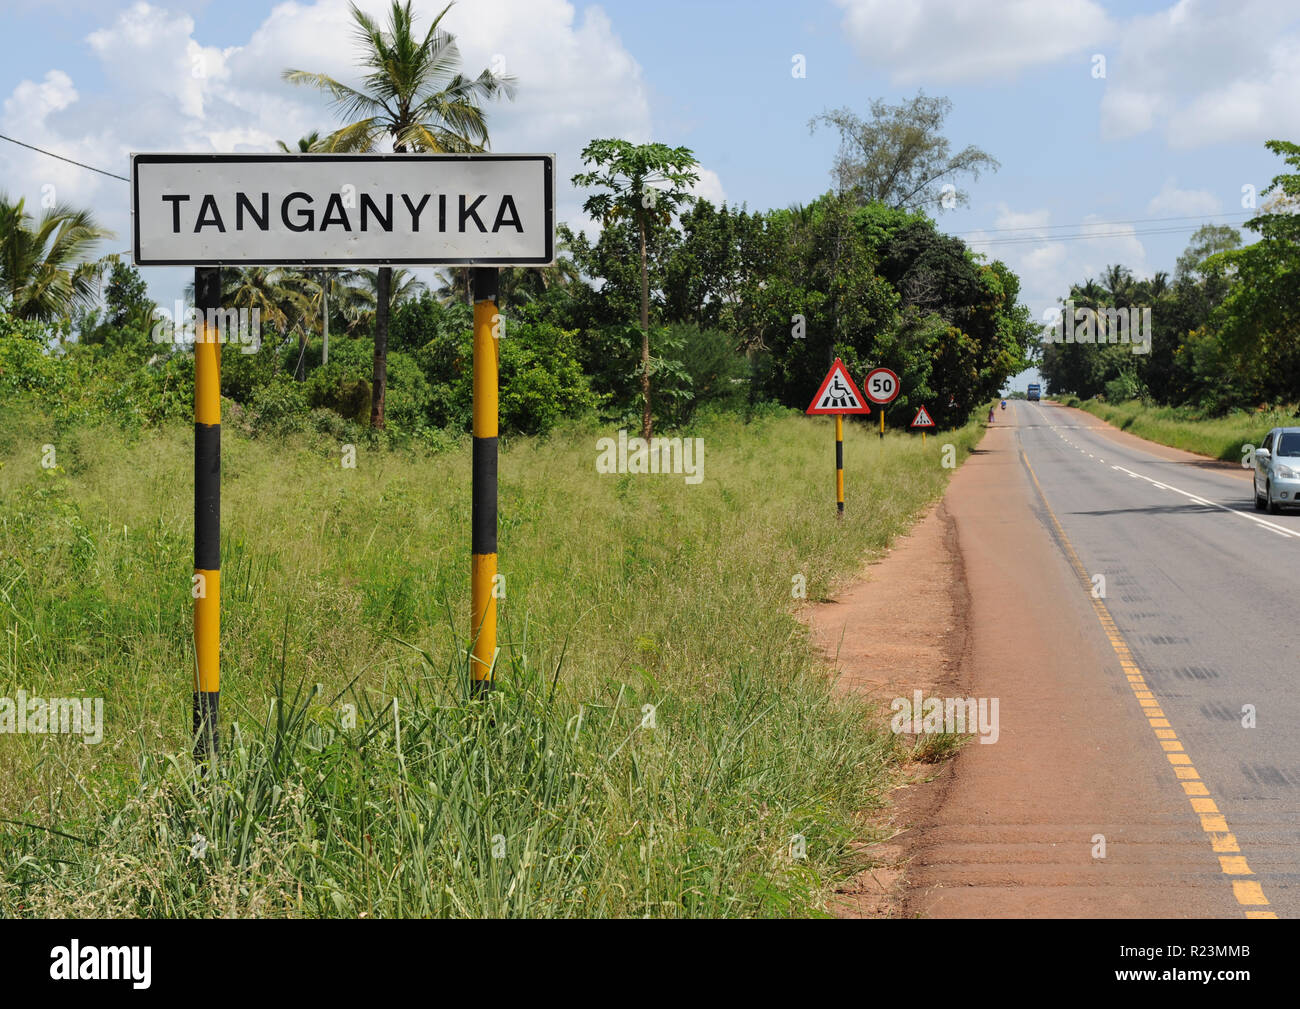 Tanganyika, Tanzania before independence, is now name of new village in  Tanga Region on Highway A14-B1 part of Great North Road resurfaced by  Chinese Stock Photo - Alamy